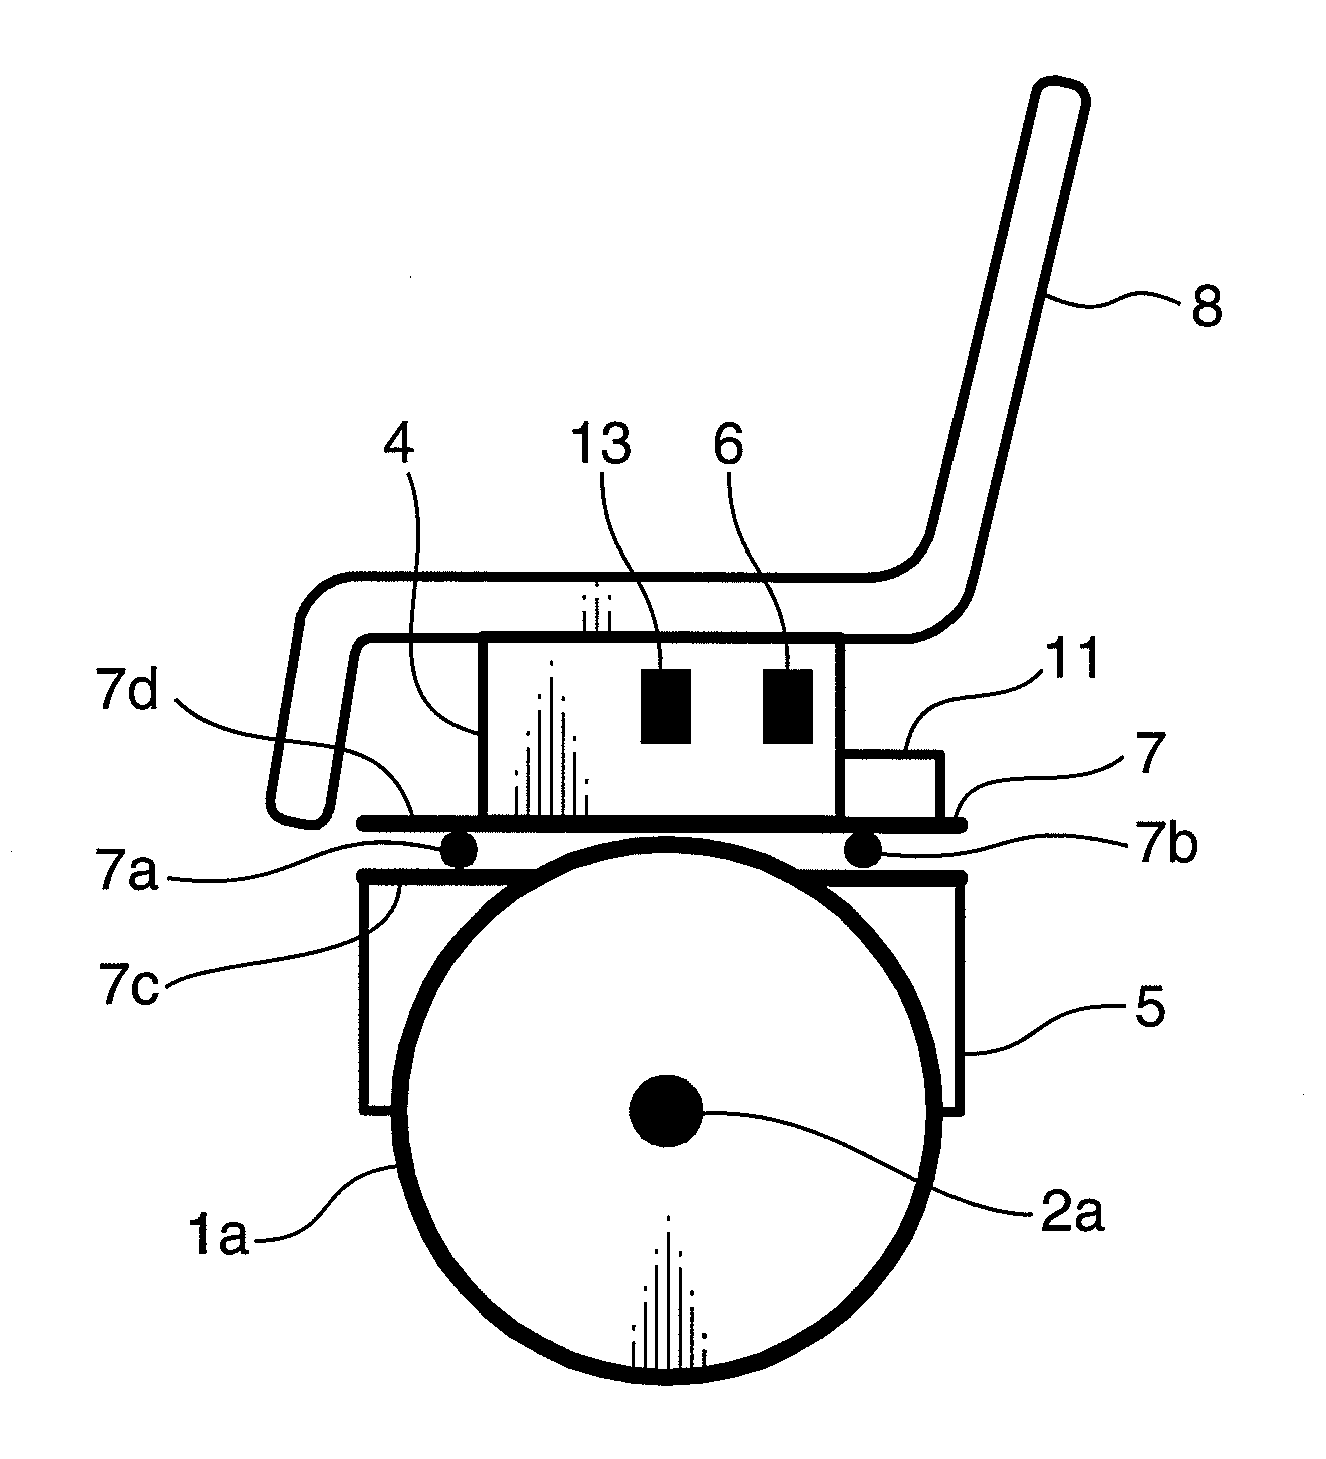 Inverted two-wheel guided vehicle and control method therefor